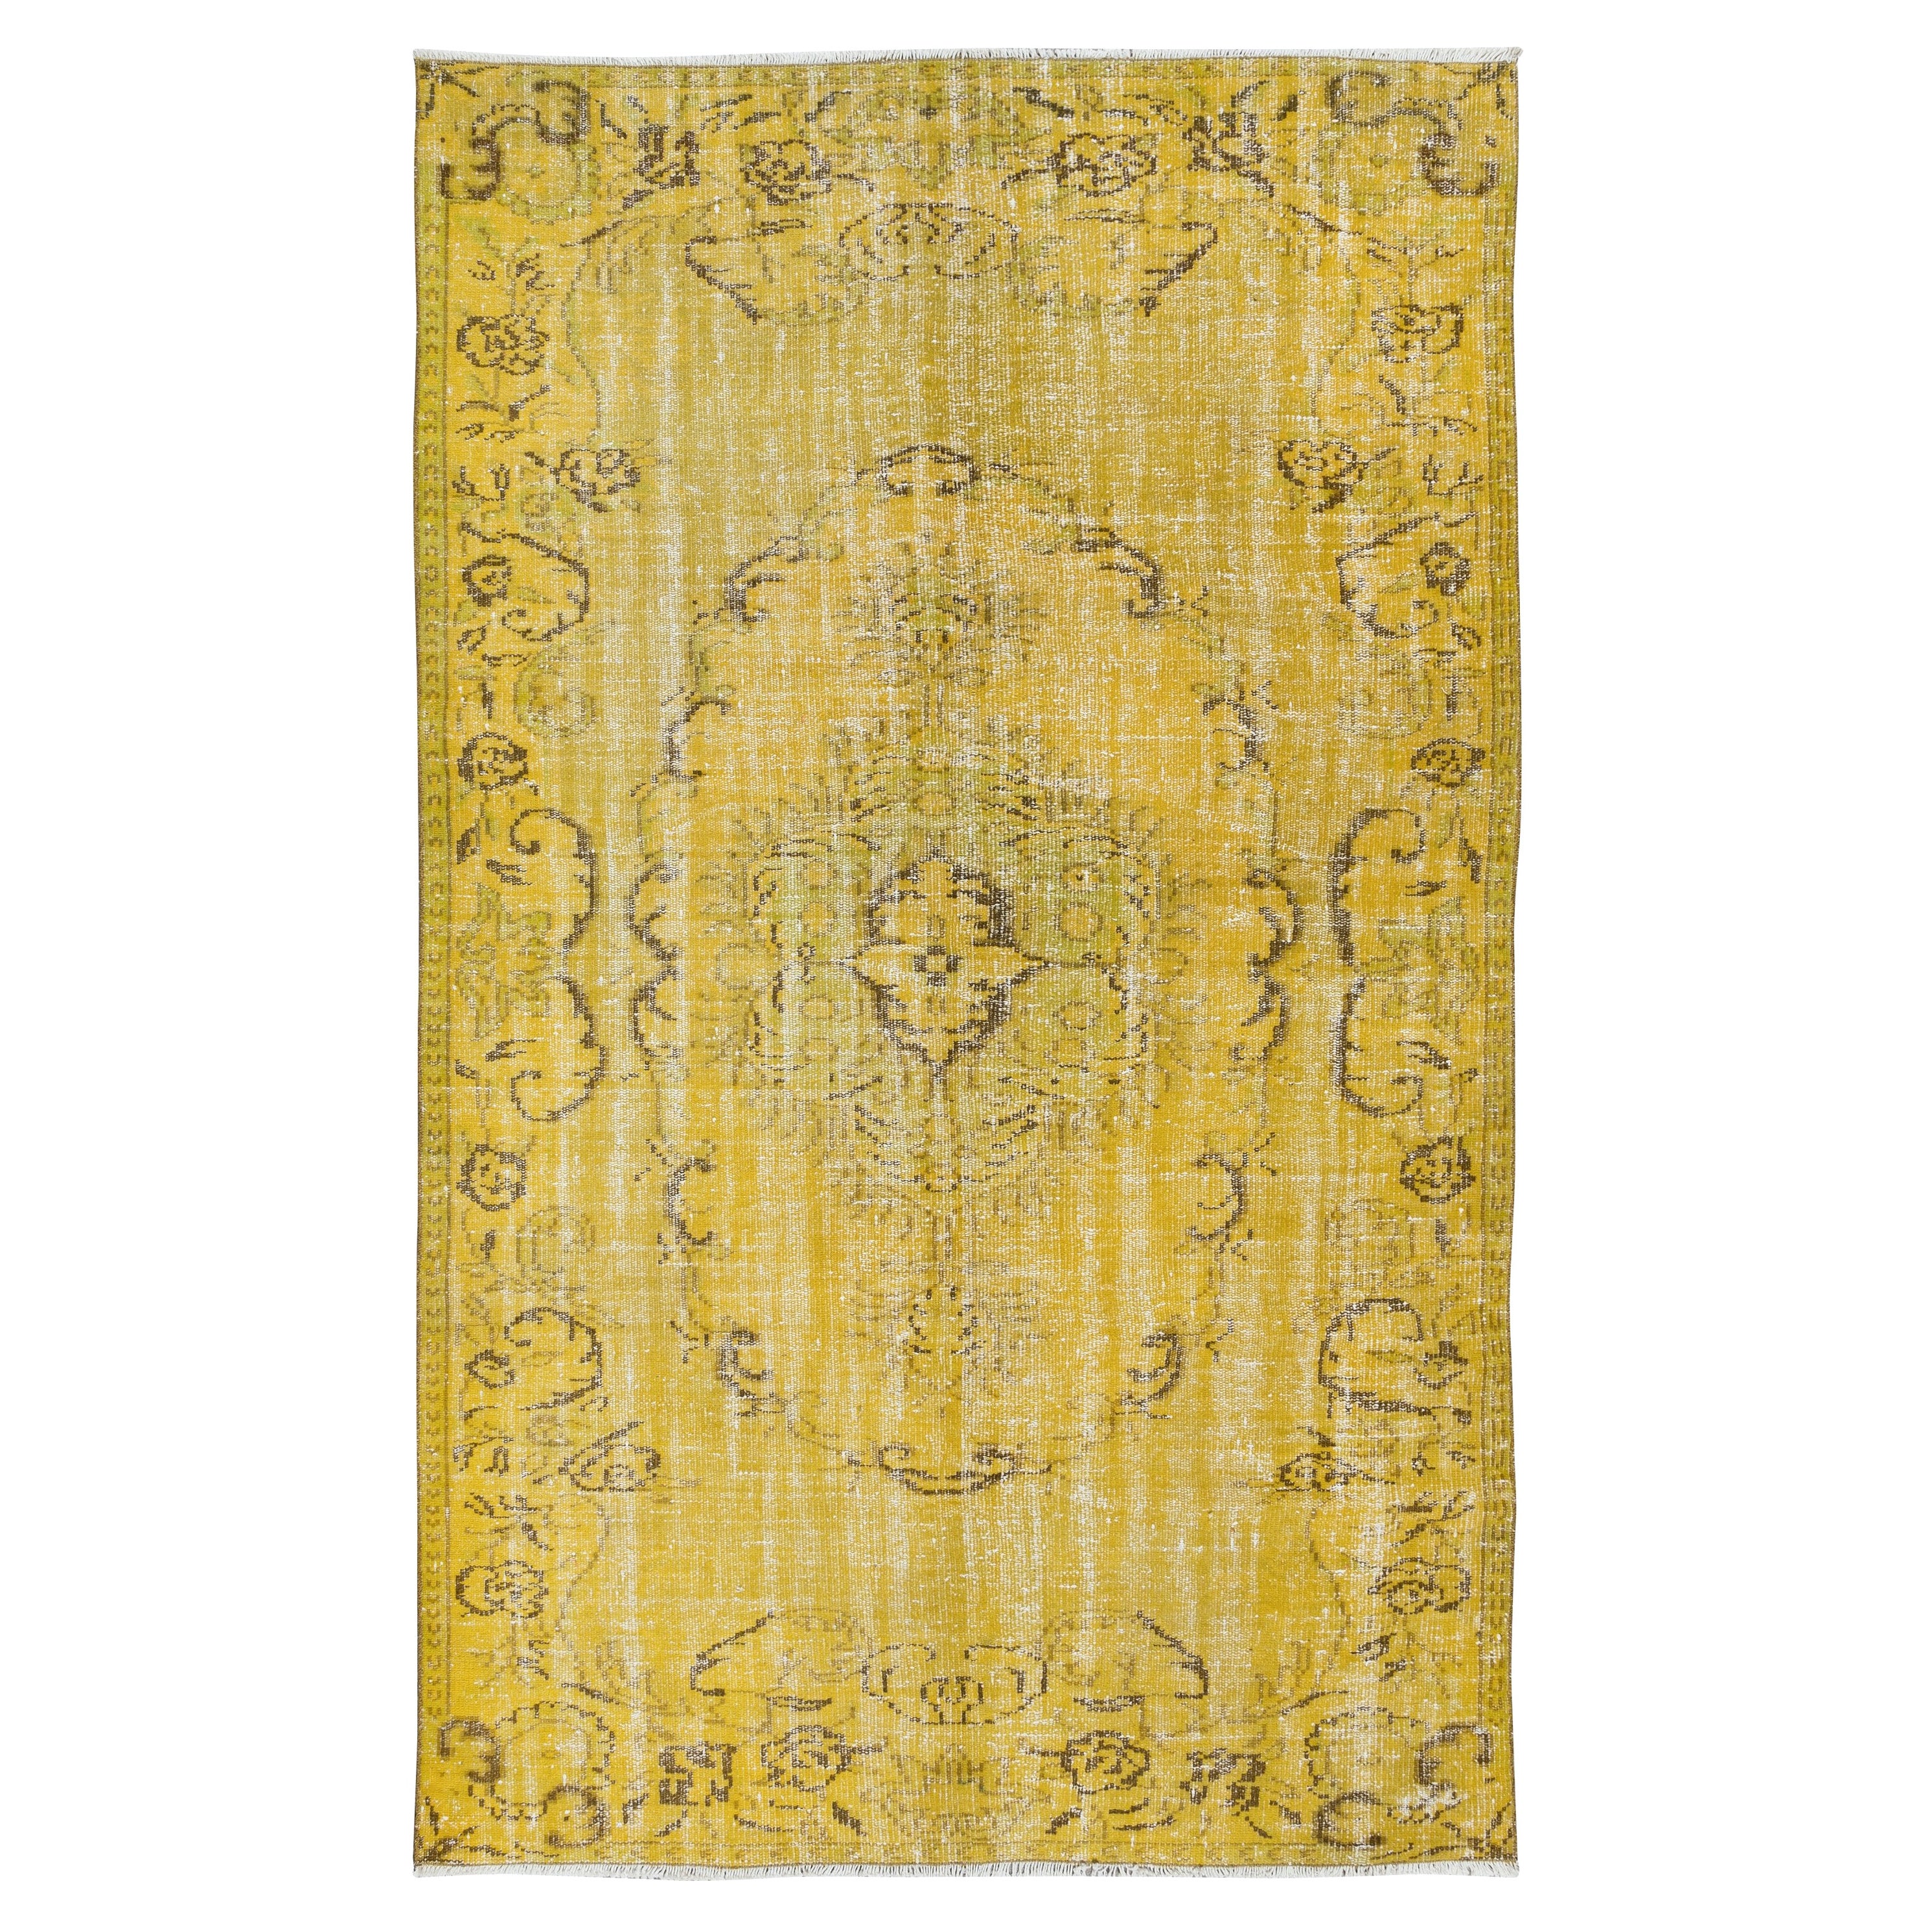 5.4x8.6 Ft Upcycled Handmade Turkish Area Rug, Yellow Over-Dyed Wool Carpet For Sale